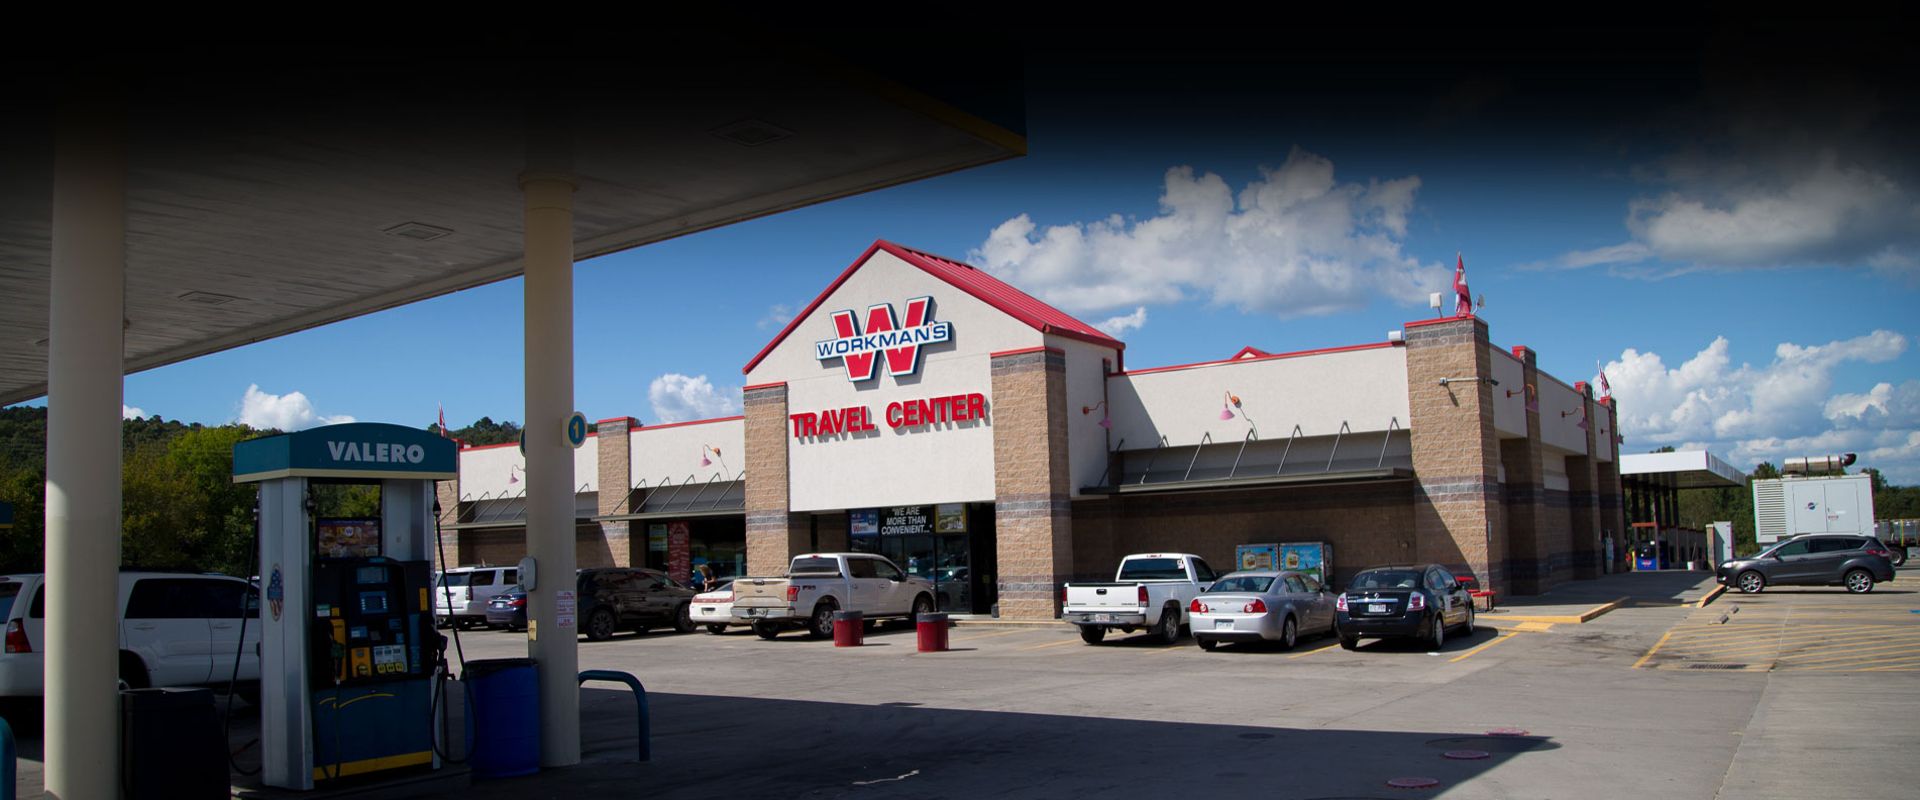 Workman&amp;#39;s Travel Centers are dedicated to providing our customers an environment that is clean, friendly, and professional with a variety of merchandise, quality food, and exceptional service.